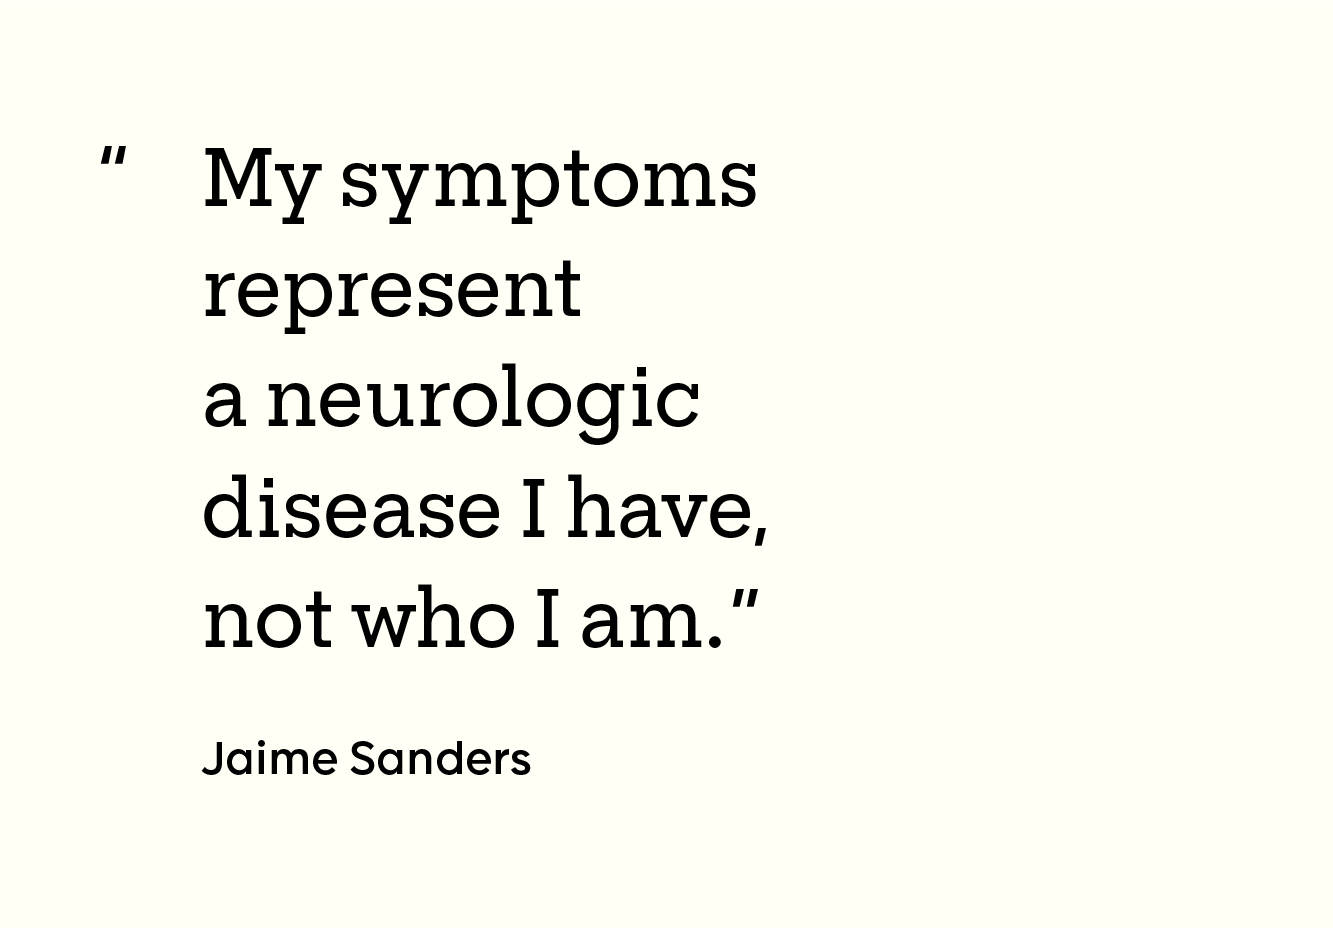 box with the quote “My symptoms represent a neurologic disease I have, not who I am.”